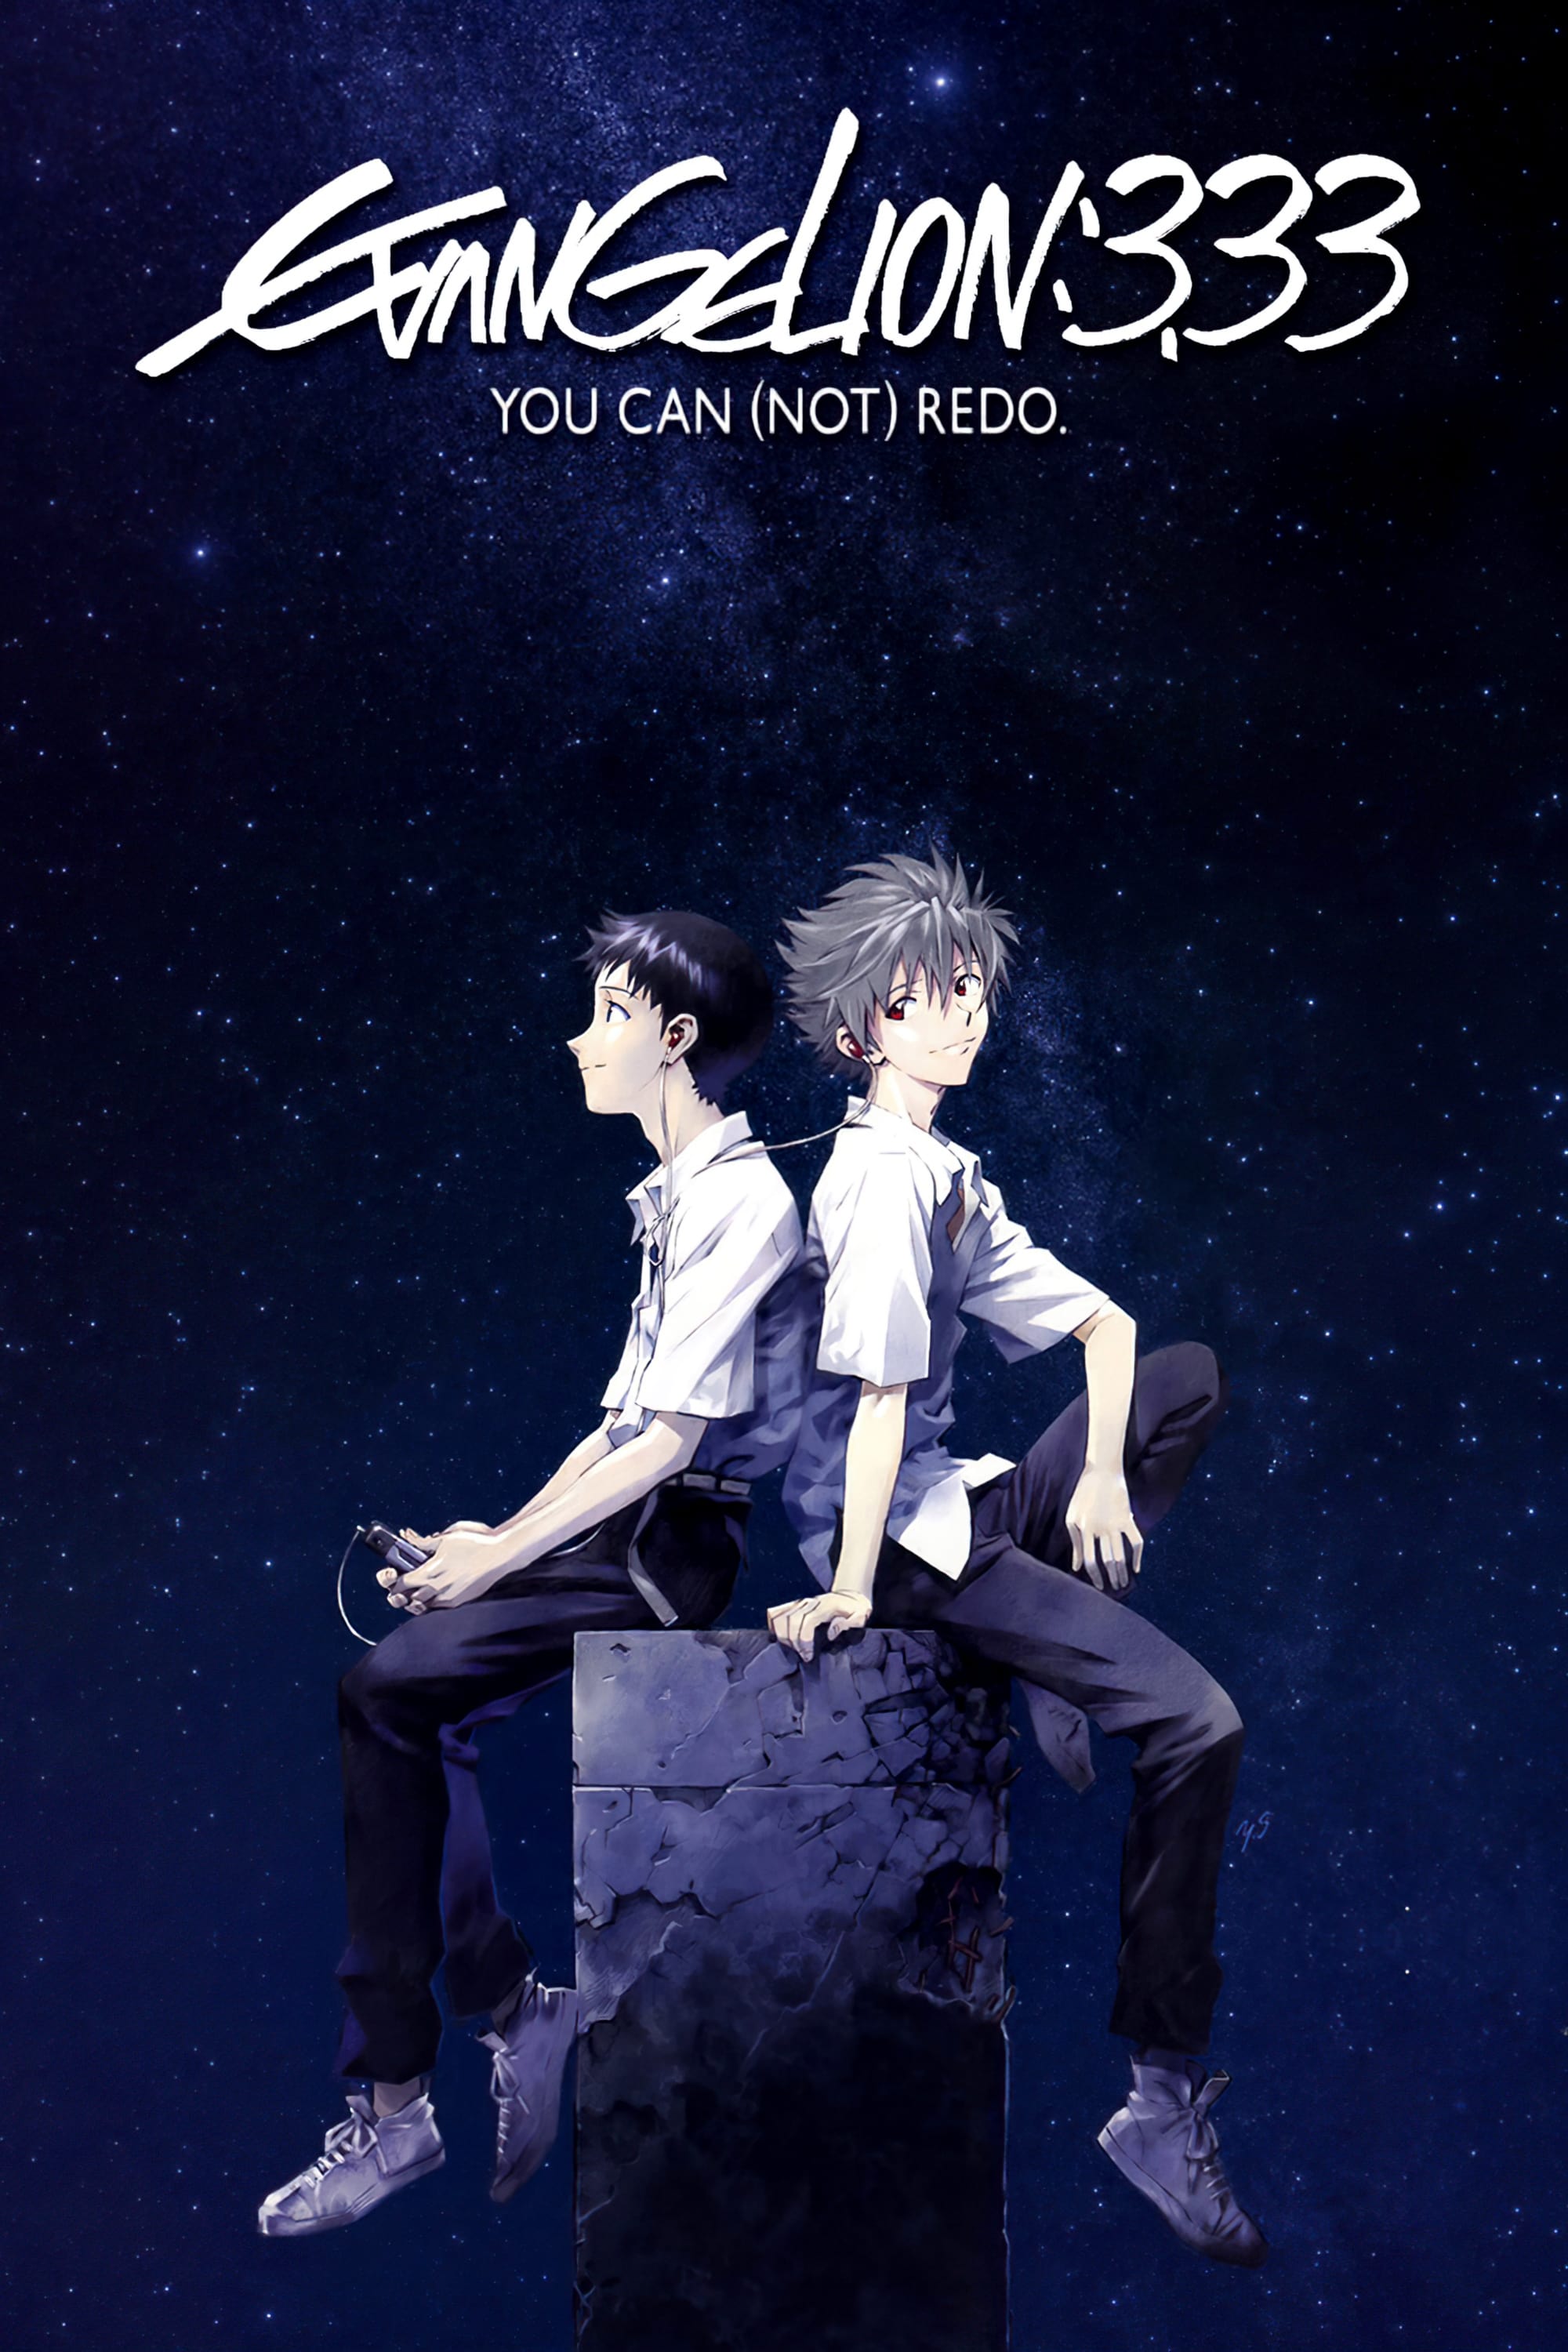 Evangelion: 3.0 - You can (not) redo